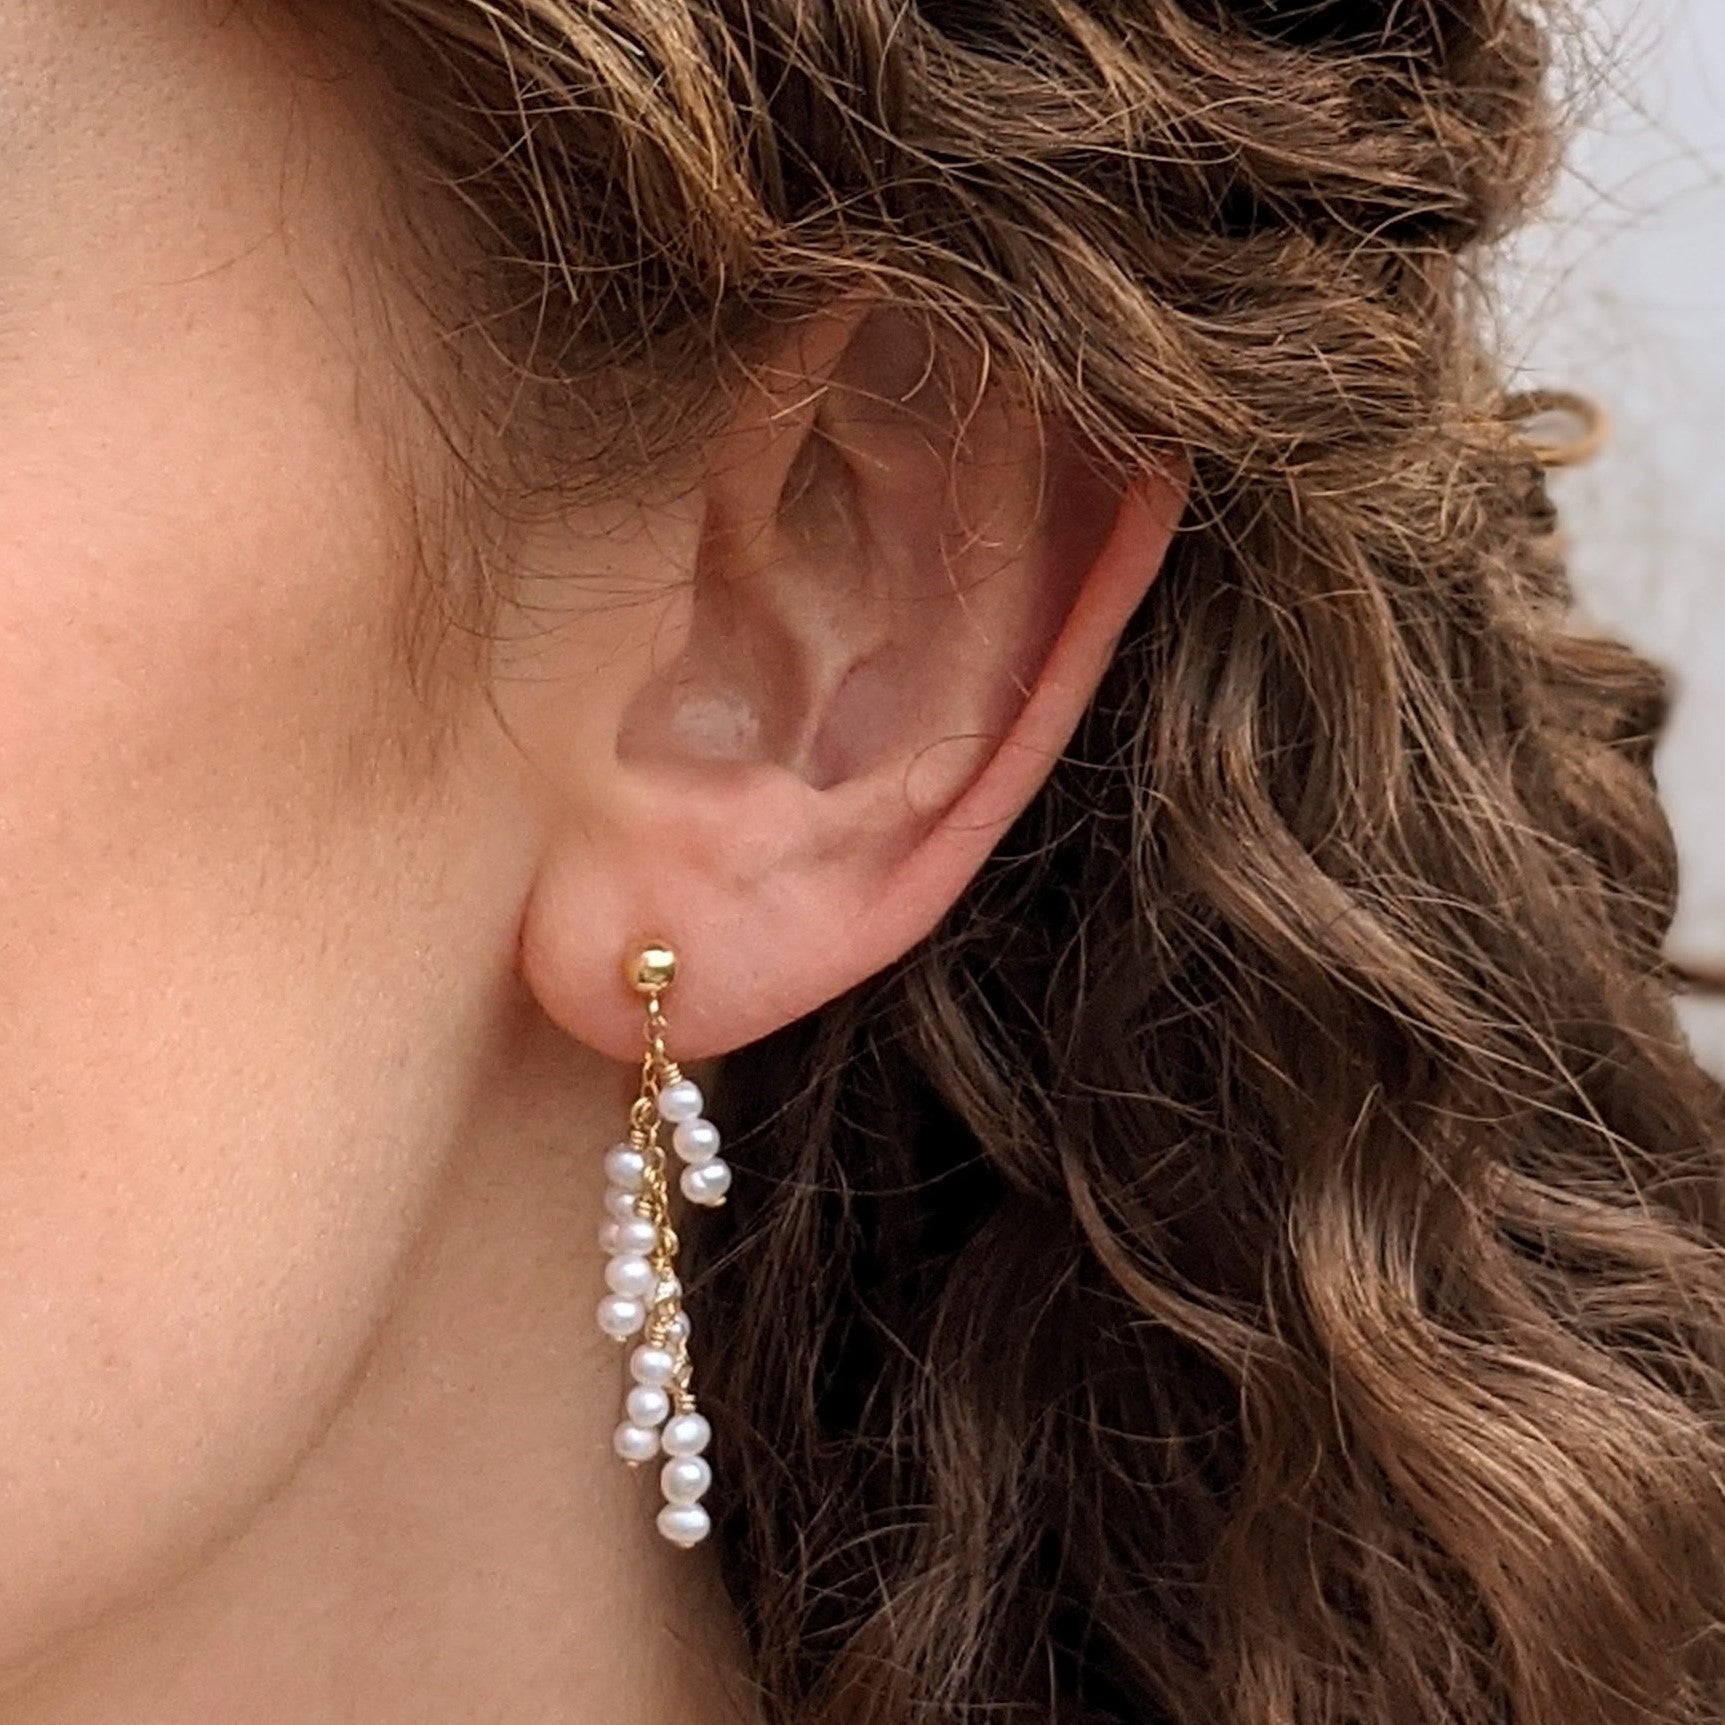 Model wearing tiny pearl drop earrings from gold ball stud